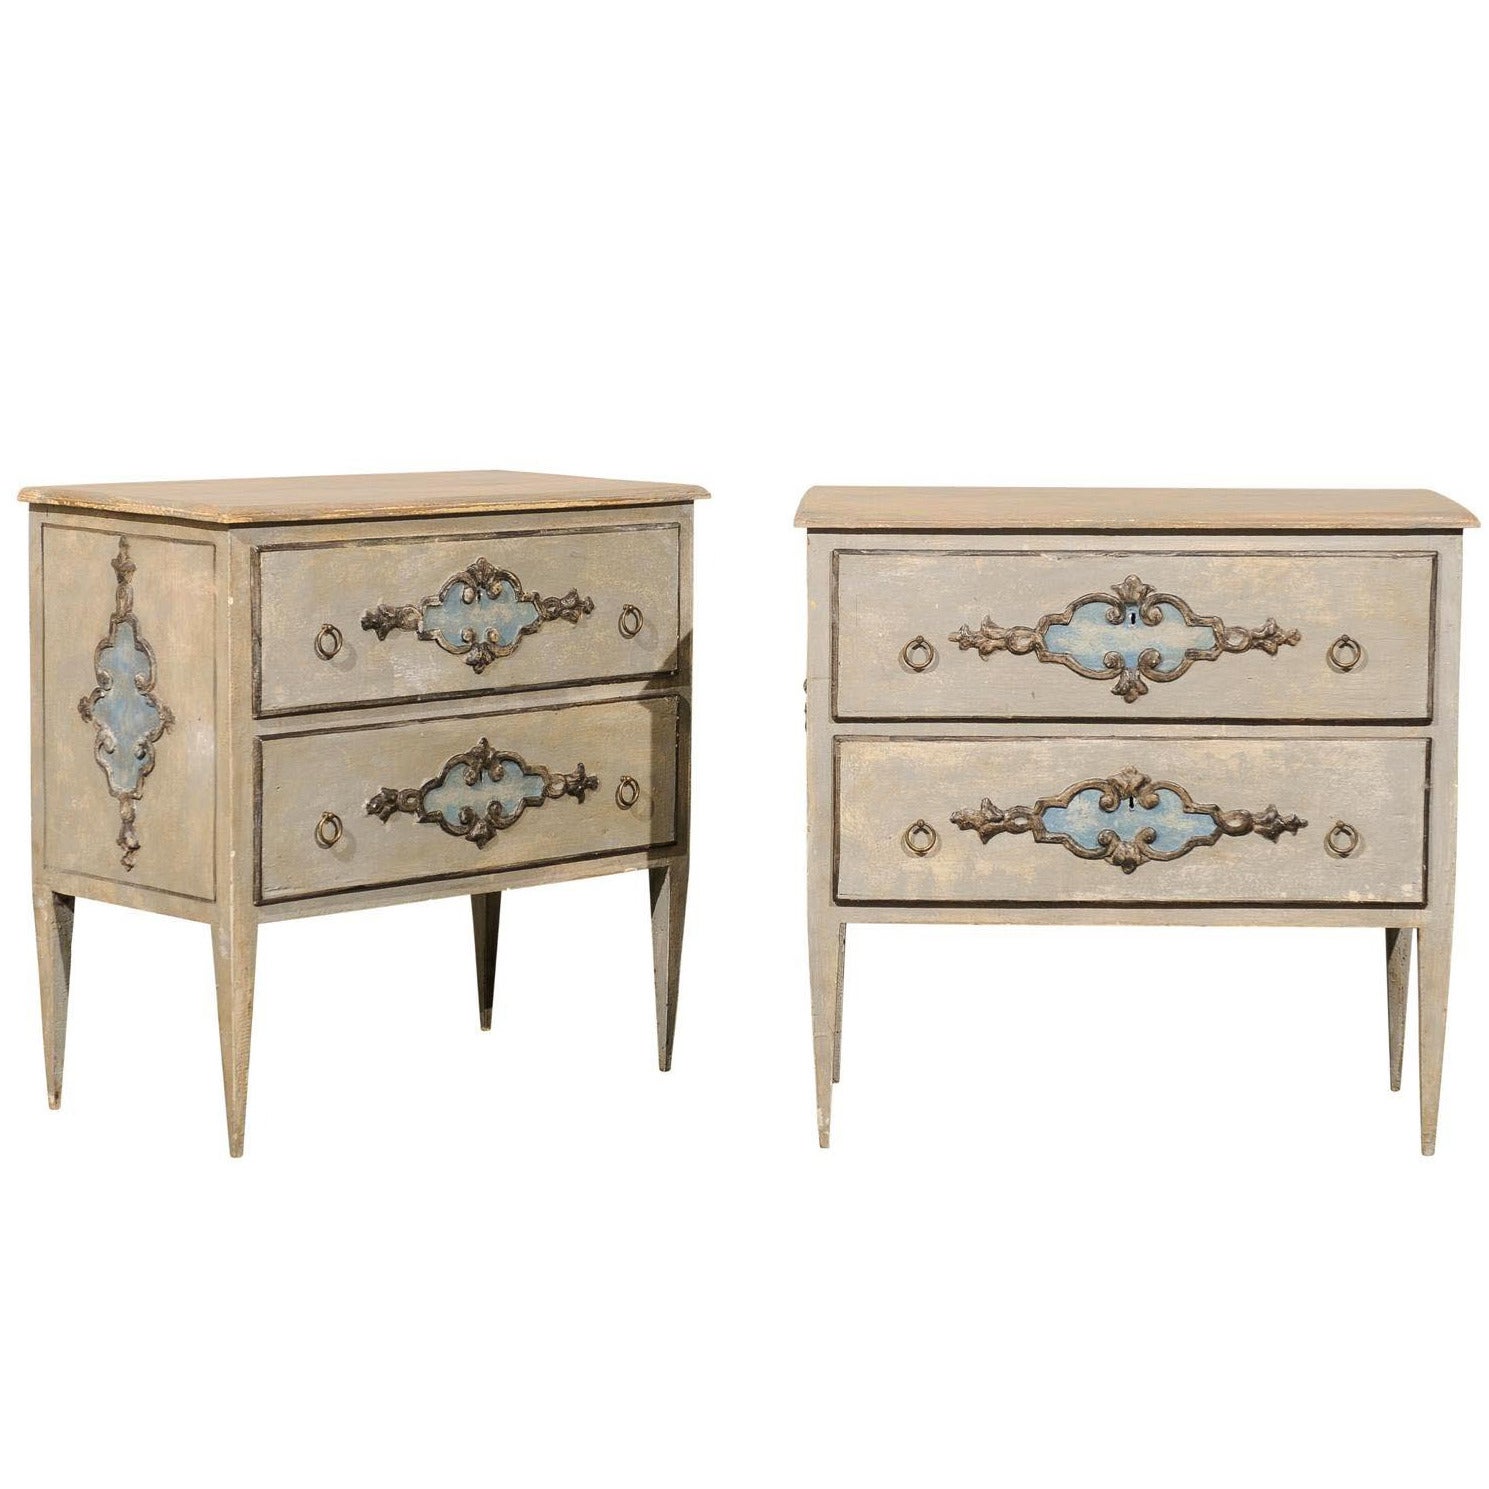 Exquisite Pair of Italian Painted Wood Two-Drawer Chests